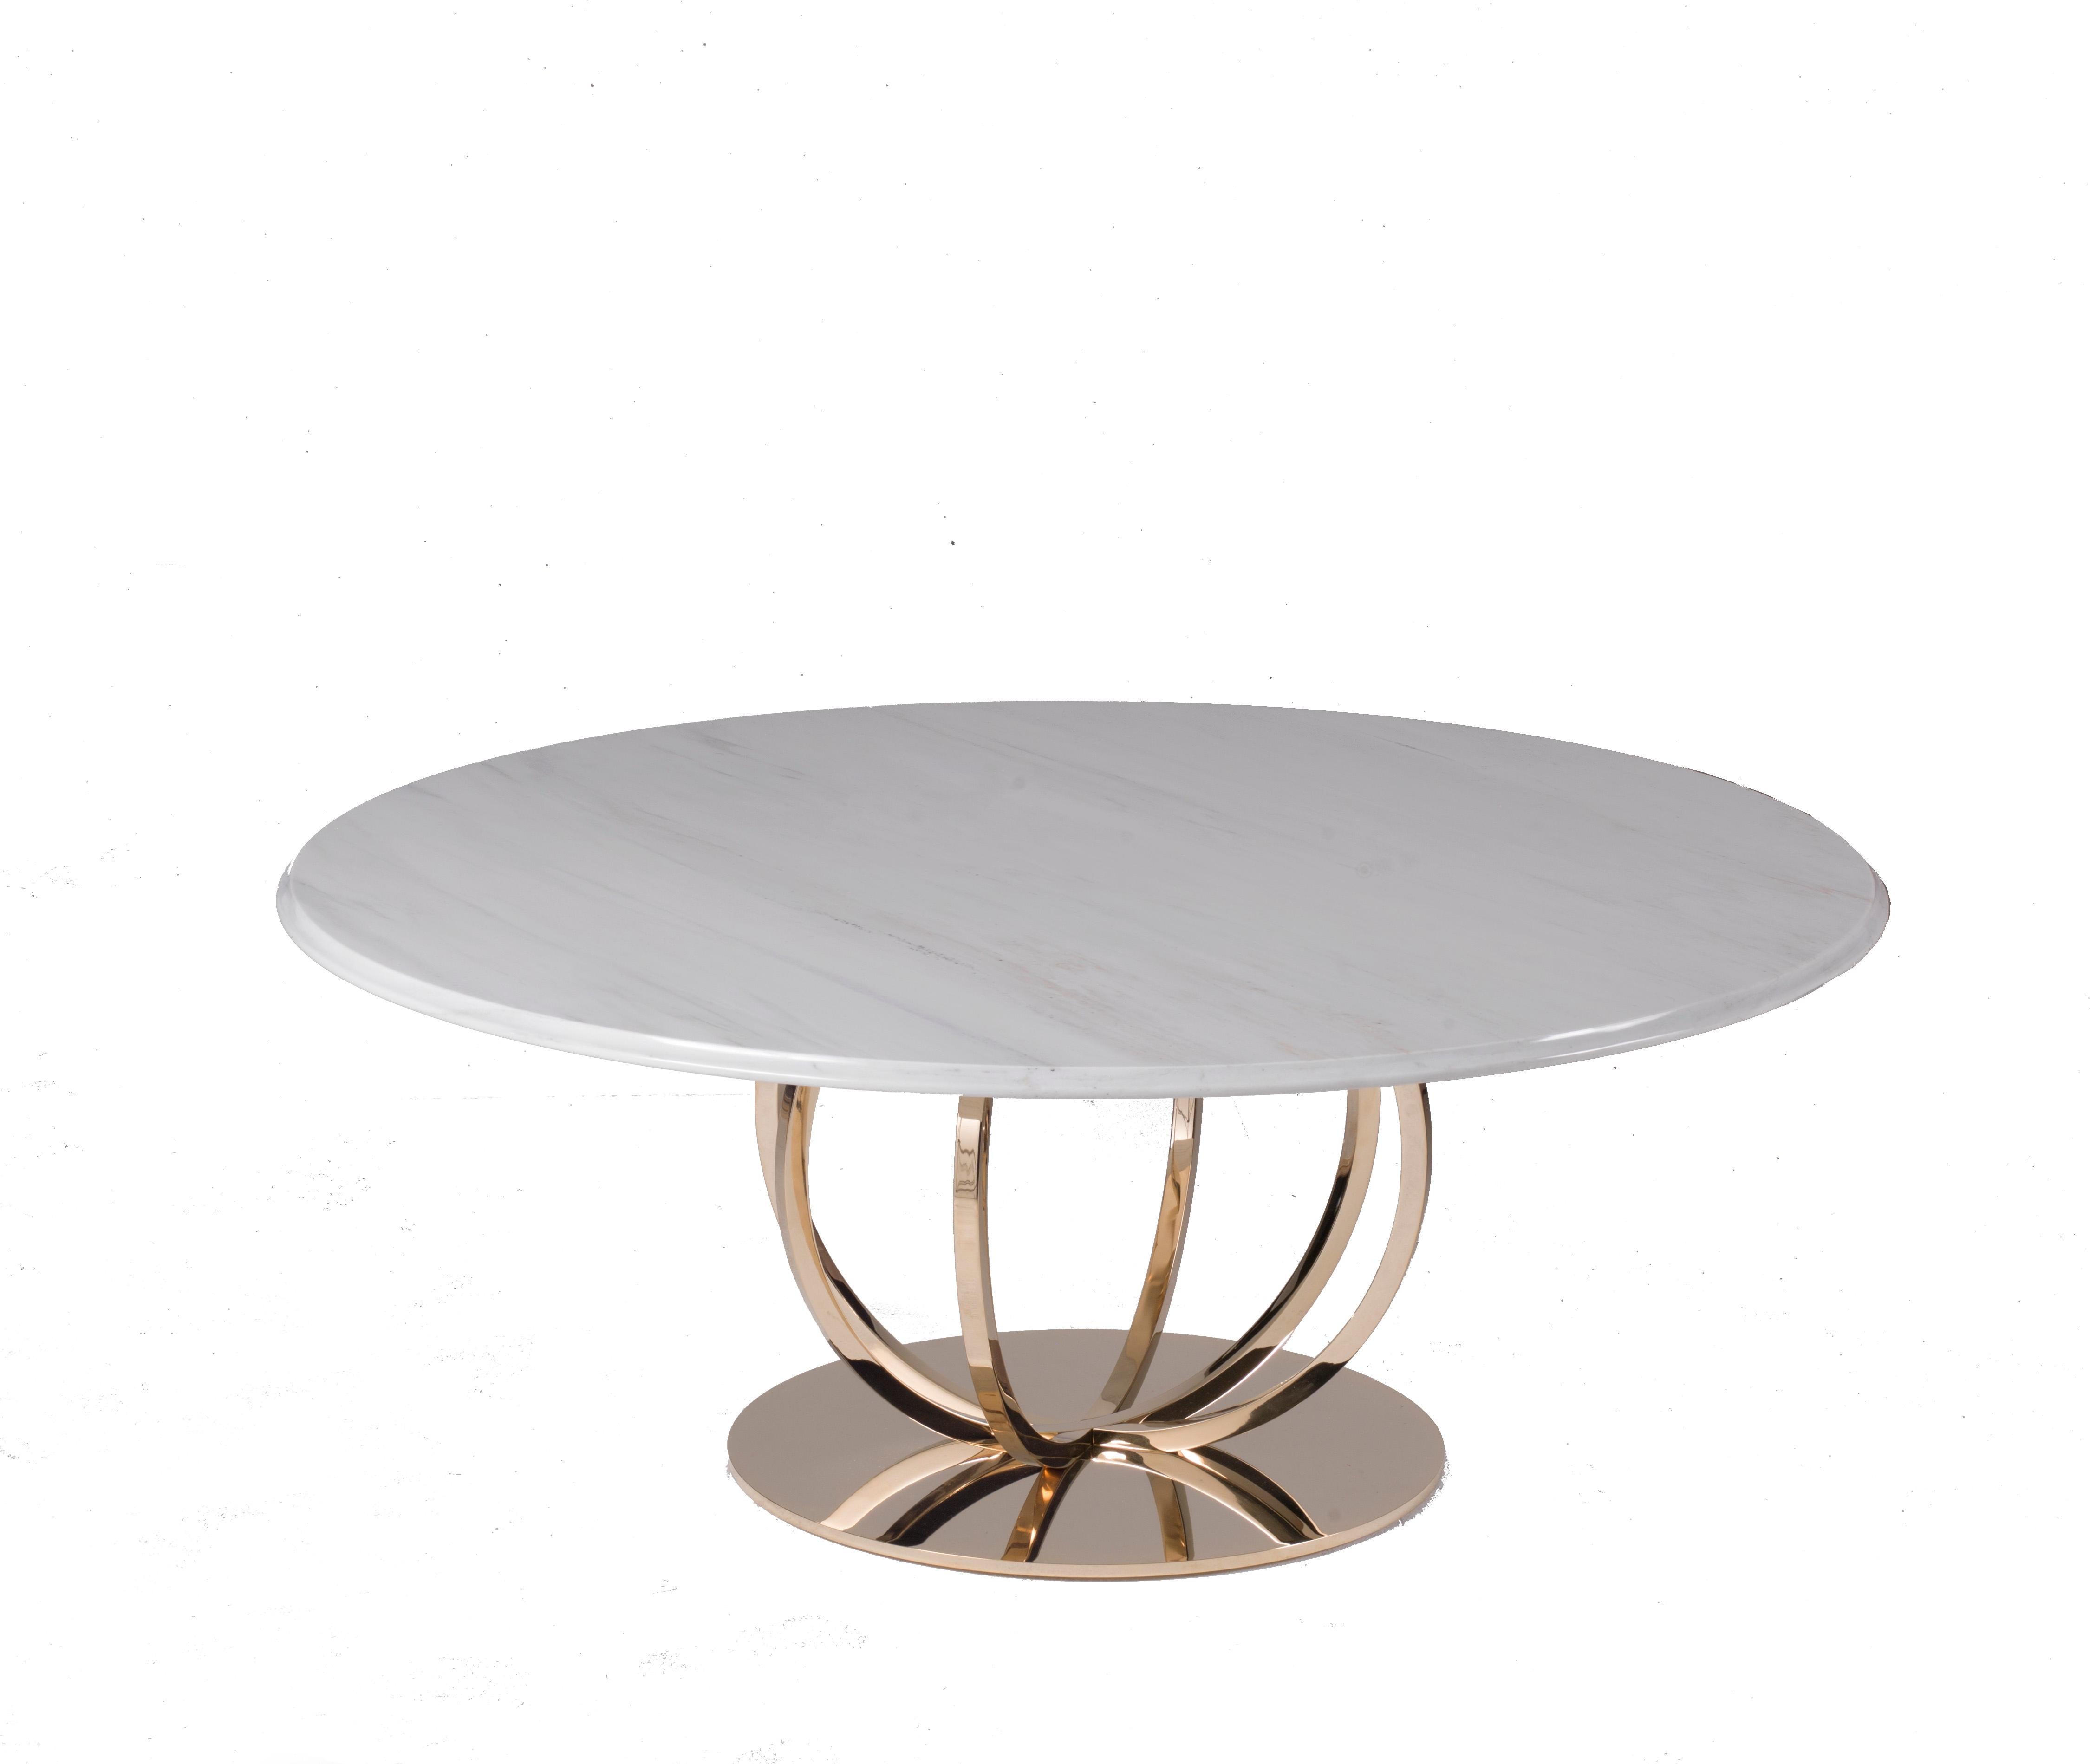 Contemporary coffee table with round Estremoz (MR08) marble top and gold finish metal base, the T179/G is intended for classy and sophisticated interiors, matching luxury materials to sleek and clean lines.  100% handmade and made in Italy, the top